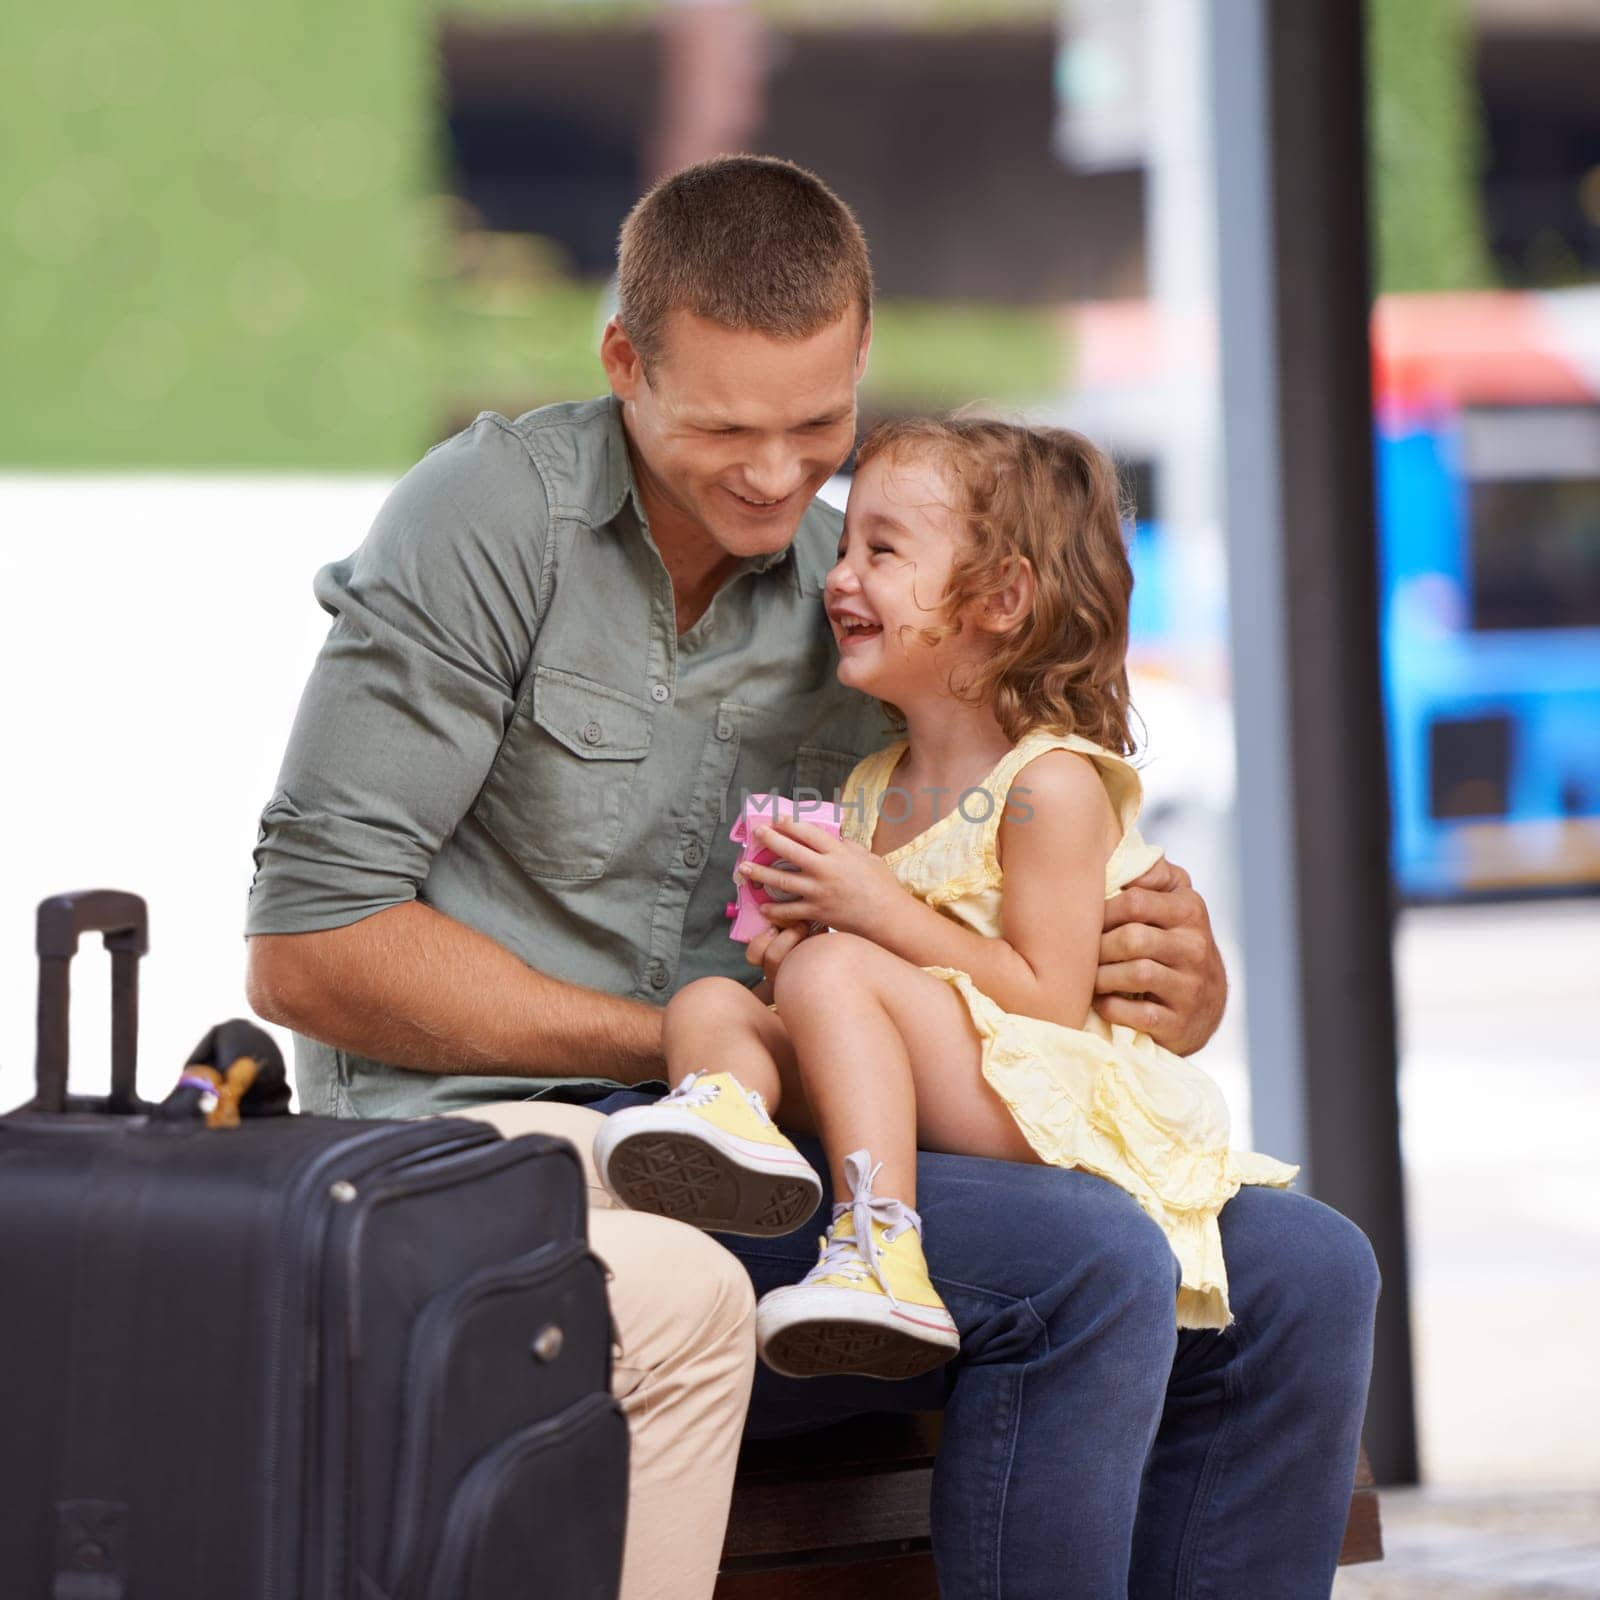 Father, child and suitcase for travel outdoor or happy laughing together for holiday, vacation or journey. Male person, daughter and luggage or waiting for trip to Hawaii, travellers or connection.